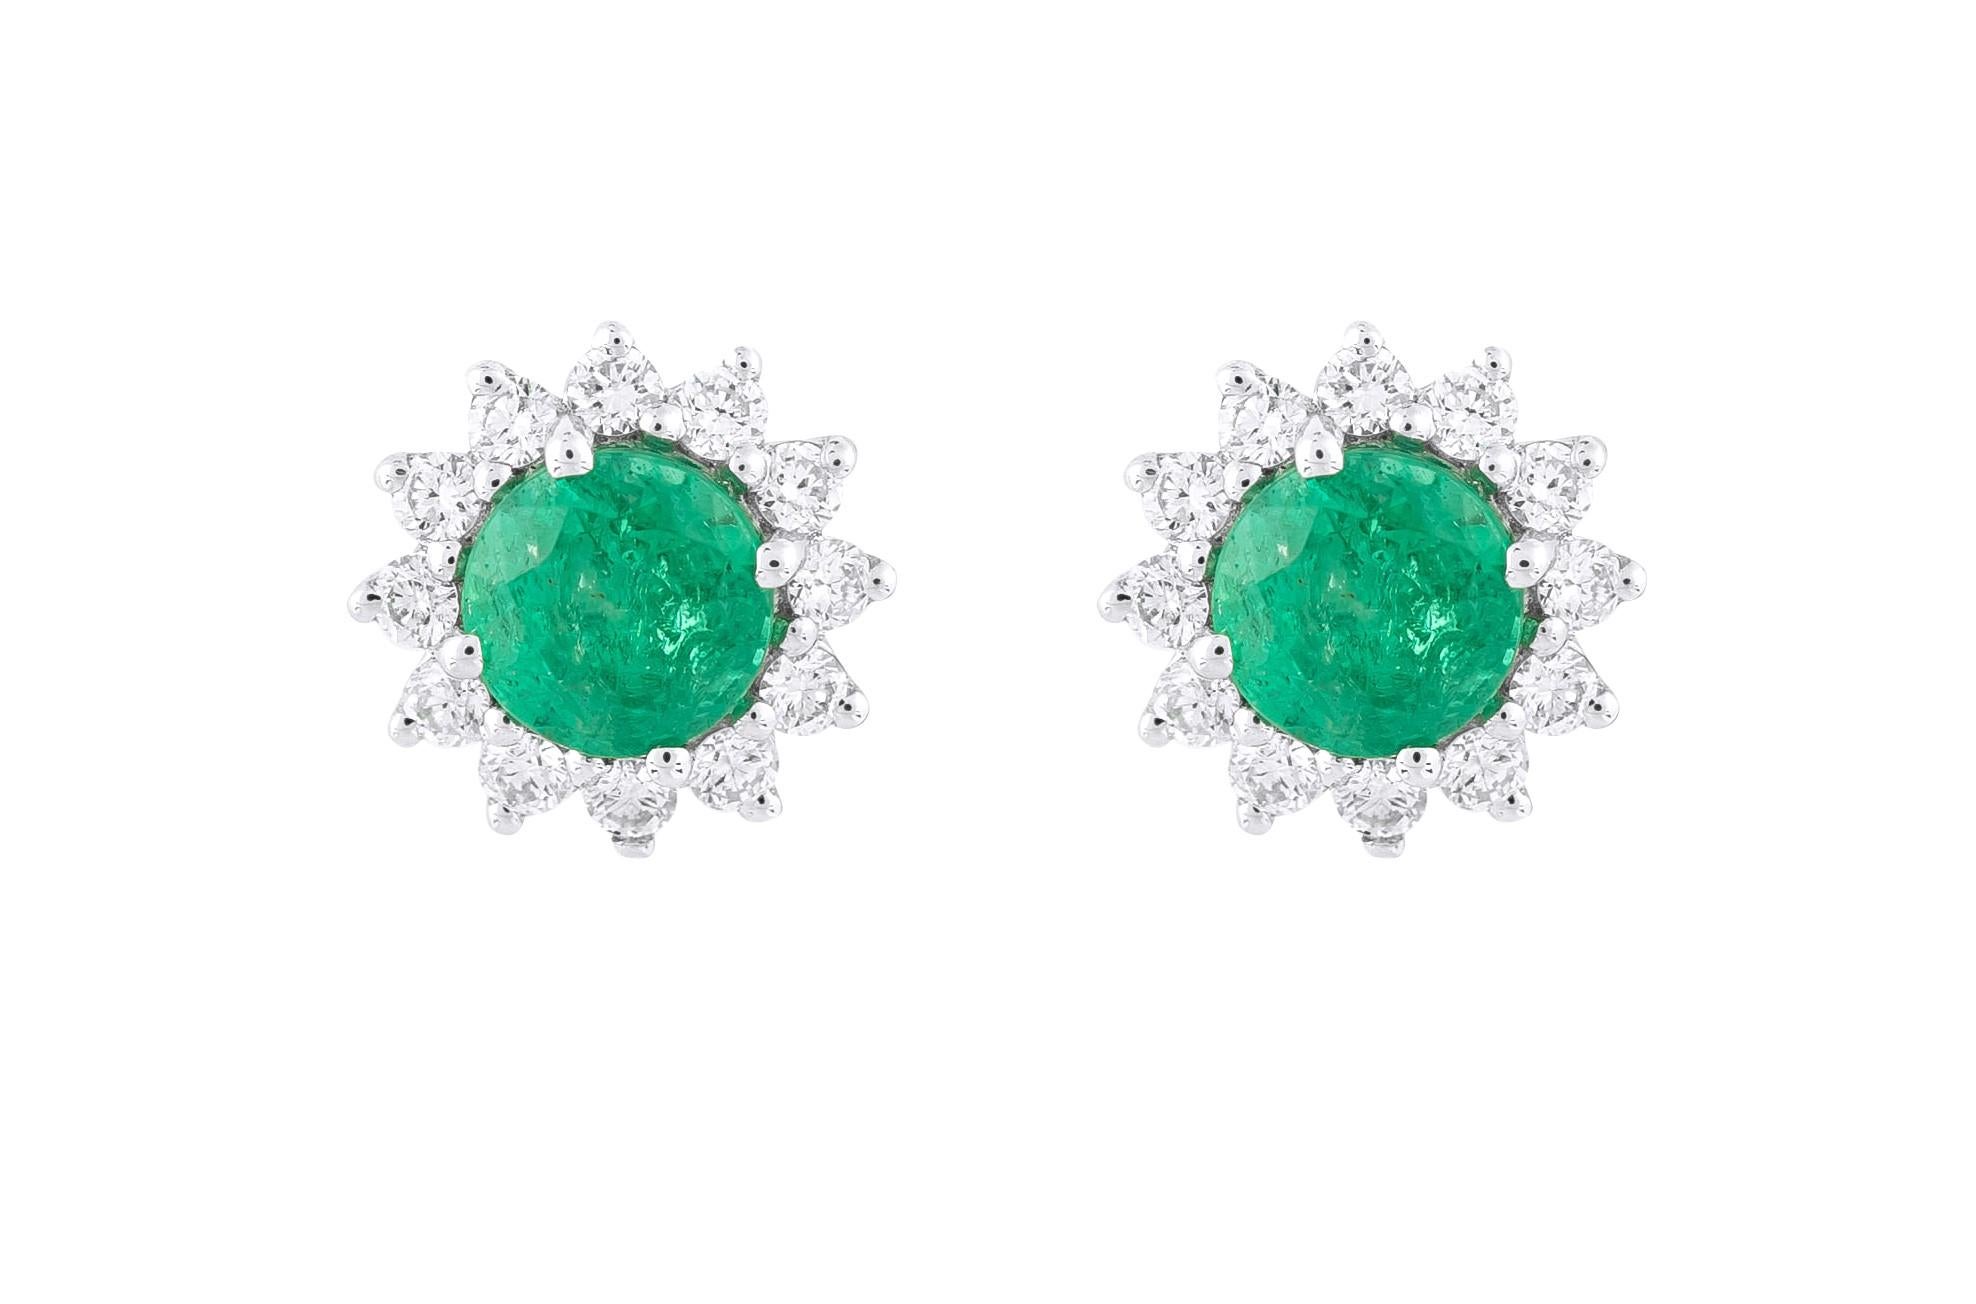 Step into a world of sophistication and elegance with our 18 Karat Gold 1.29 Carat Diamond and Emerald Solitaire Stud Earrings. Each of these pieces is a unique testament to expert craftsmanship and thoughtful curation, celebrating a seamless blend